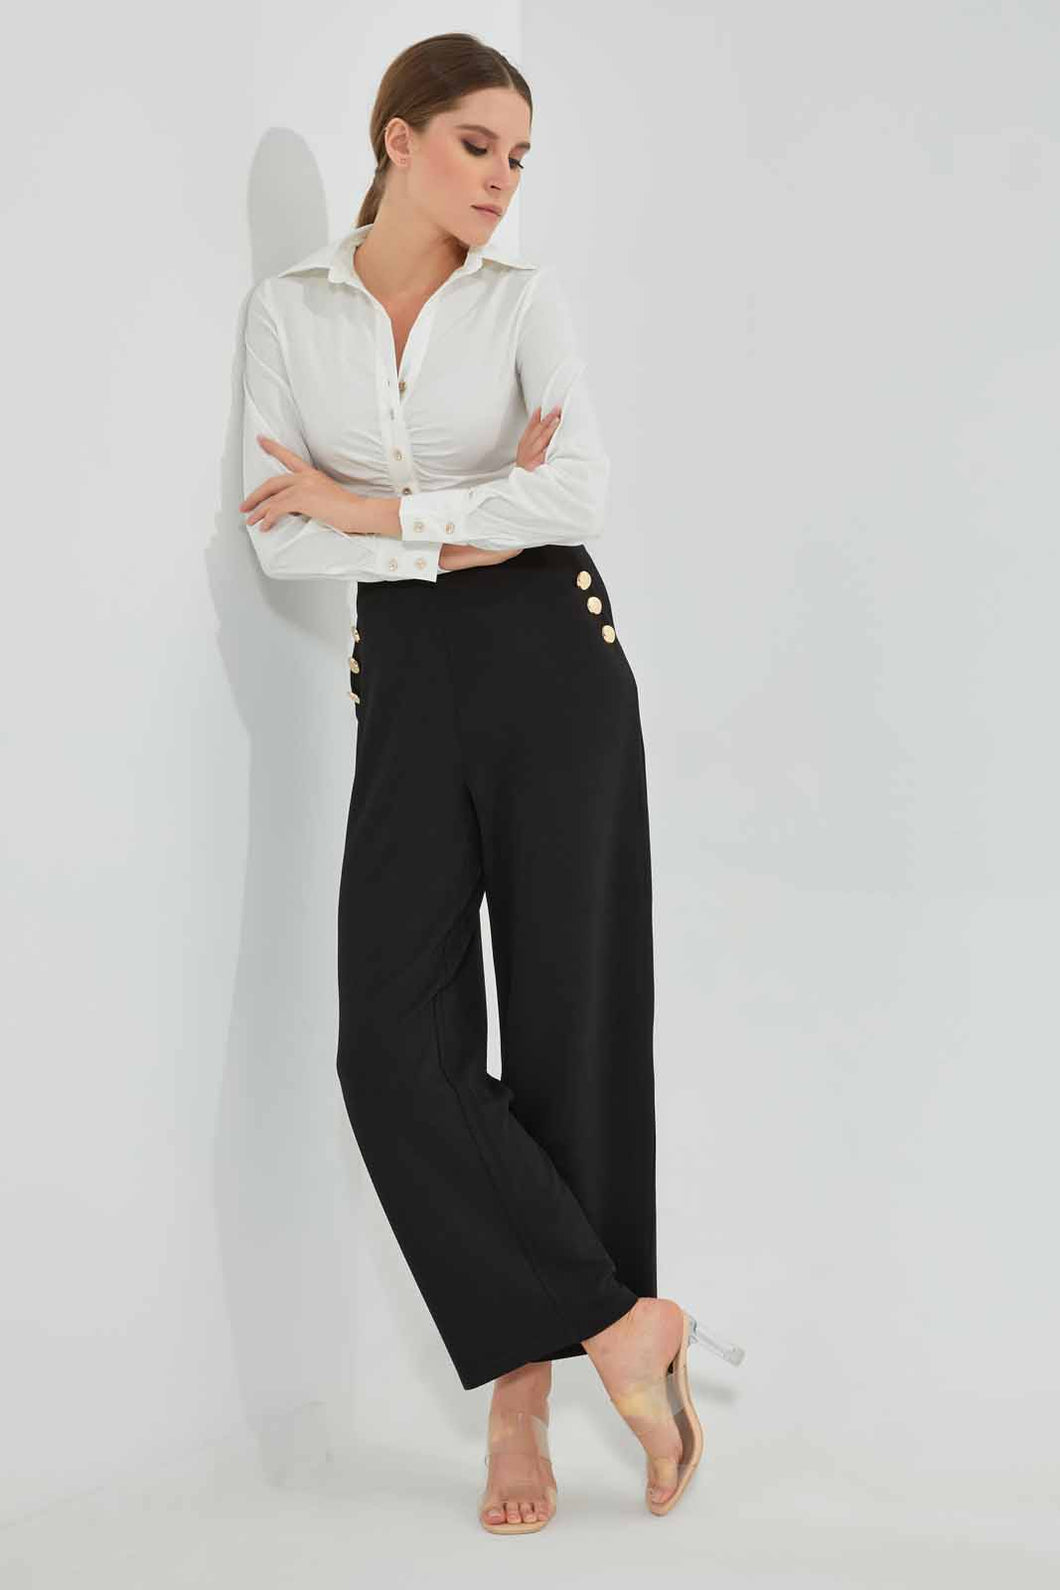 Redtag-Black-Tappered-Trousers-With-Button-Detailing-Trousers-Women's-